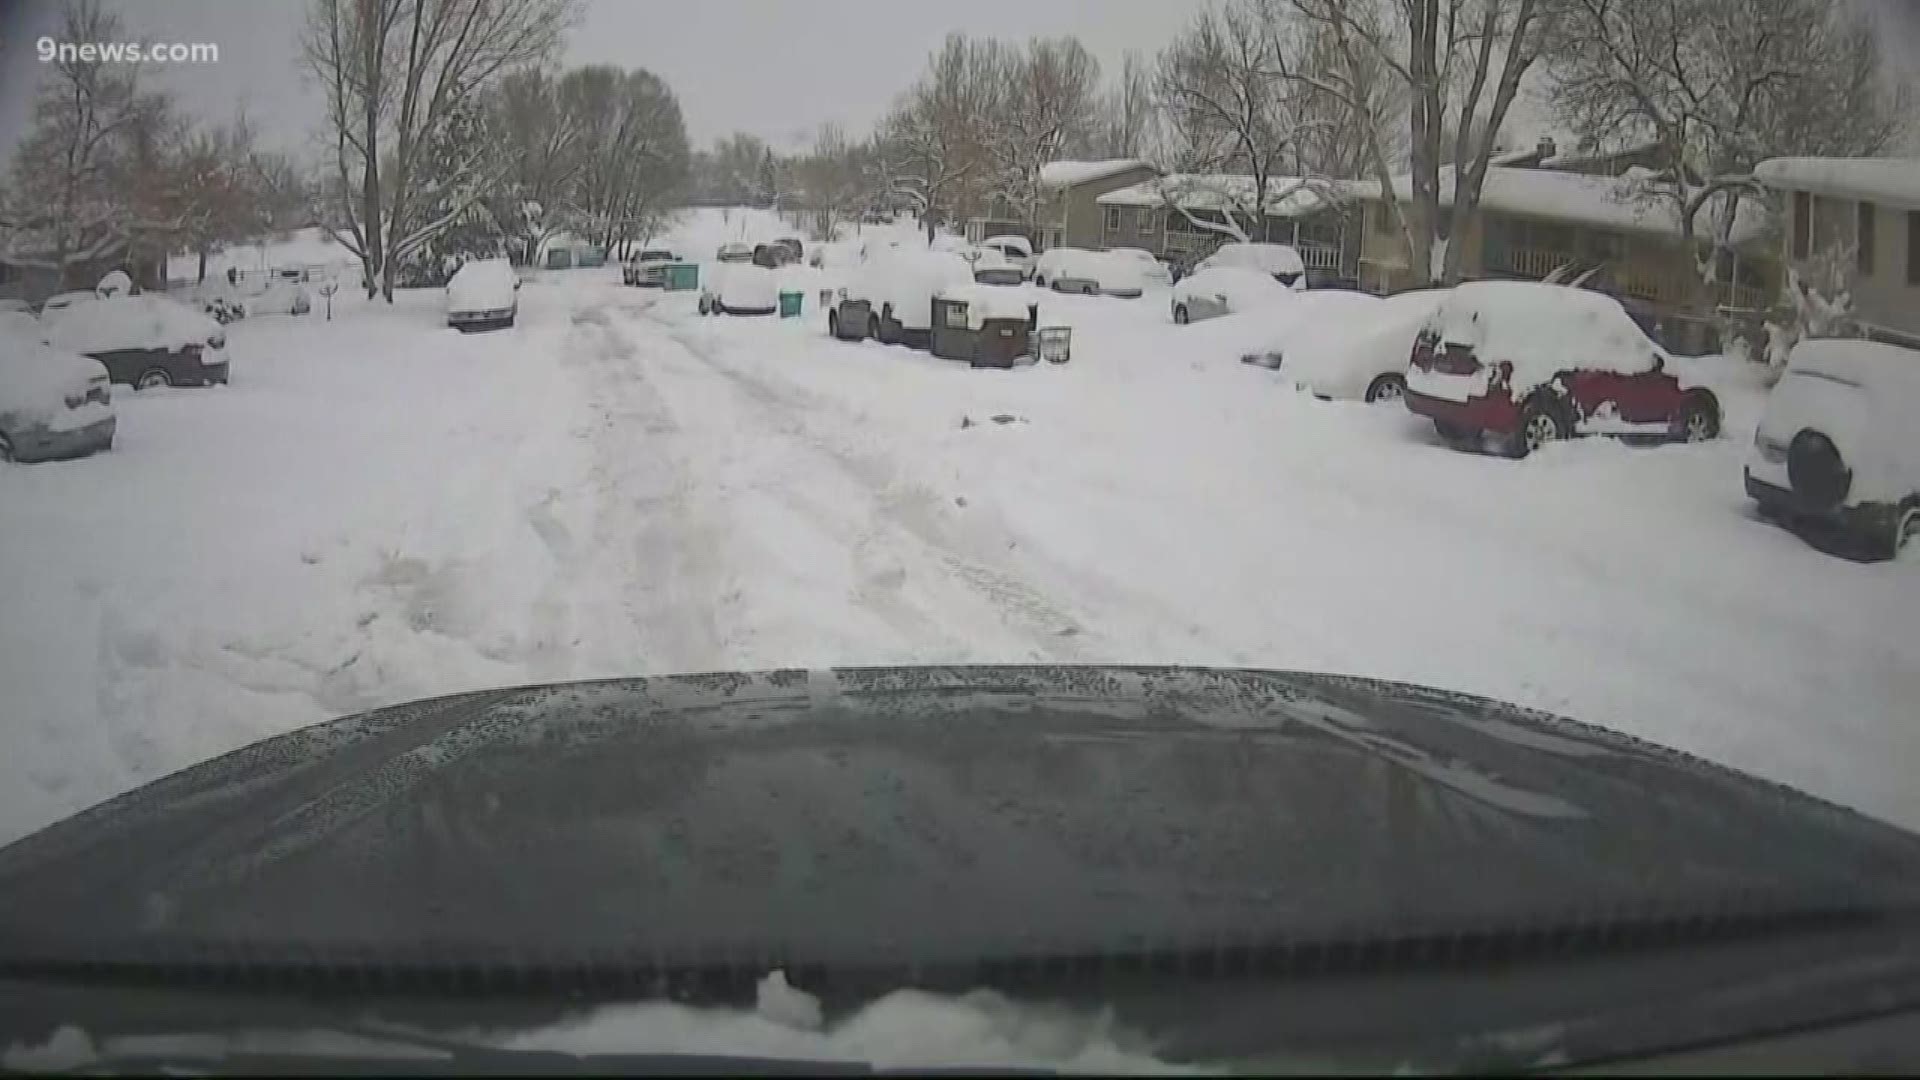 9NEWS' Noel Brennan gives us a look at the snowy weather conditions in Fort Collins. He also gives us a glimpse as they attempt to drive out of the snowy Strover St.